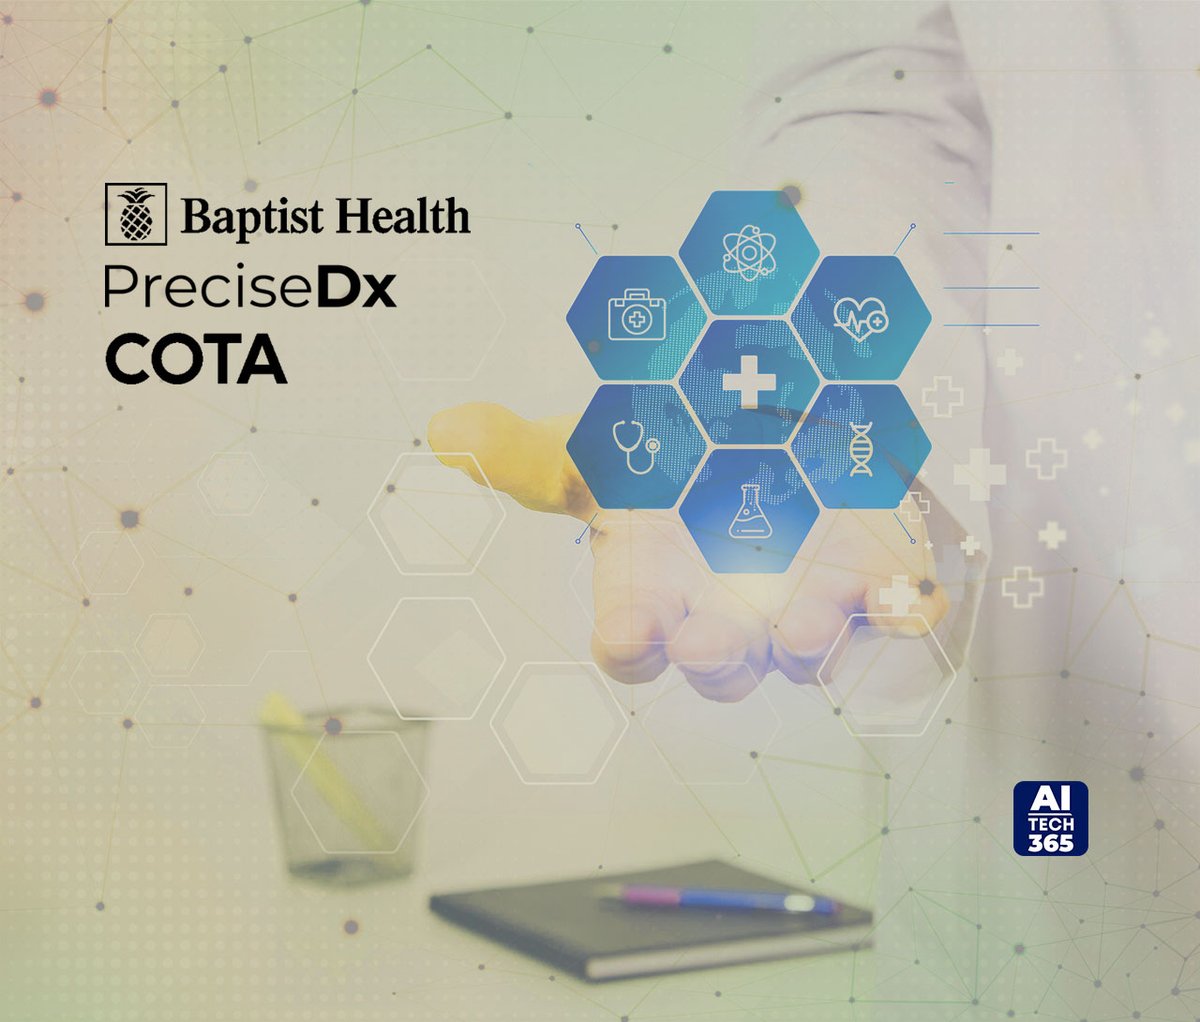 #COTA, @BaptistHealthSF South Florida, and @PreciseDx Announce Collaboration on the AI-Enabled Breast Cancer Recurrence Risk Assessment, PreciseBreast™

aitech365.com/healthcare/cot…

#AITech365 #BaptistHealth #COTA #Healthcare #invasivebreastcancer #news #PreciseBreast #PreciseDx